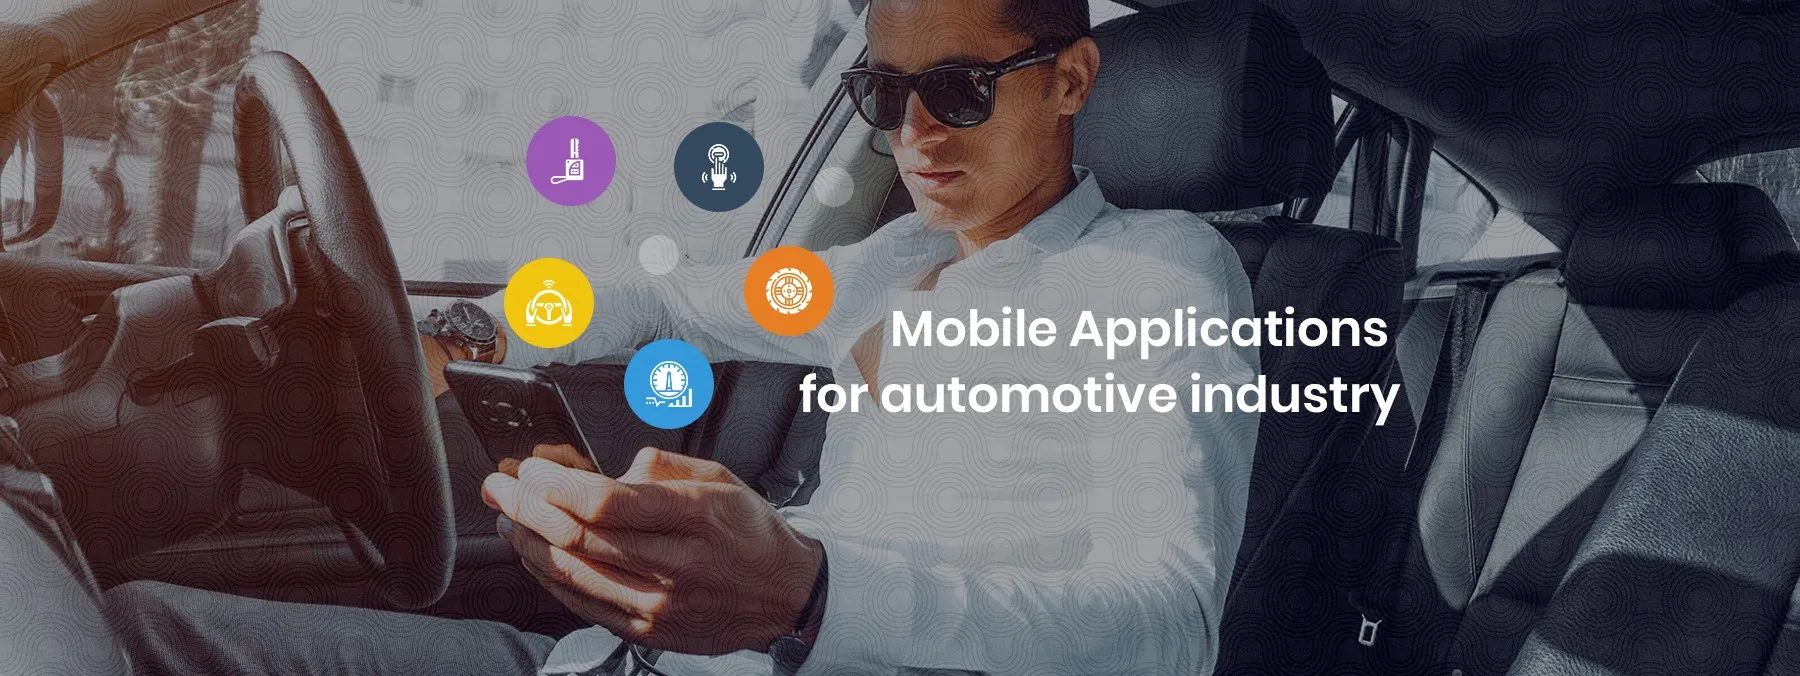 Developing Mobile Apps for the Automotive Industry